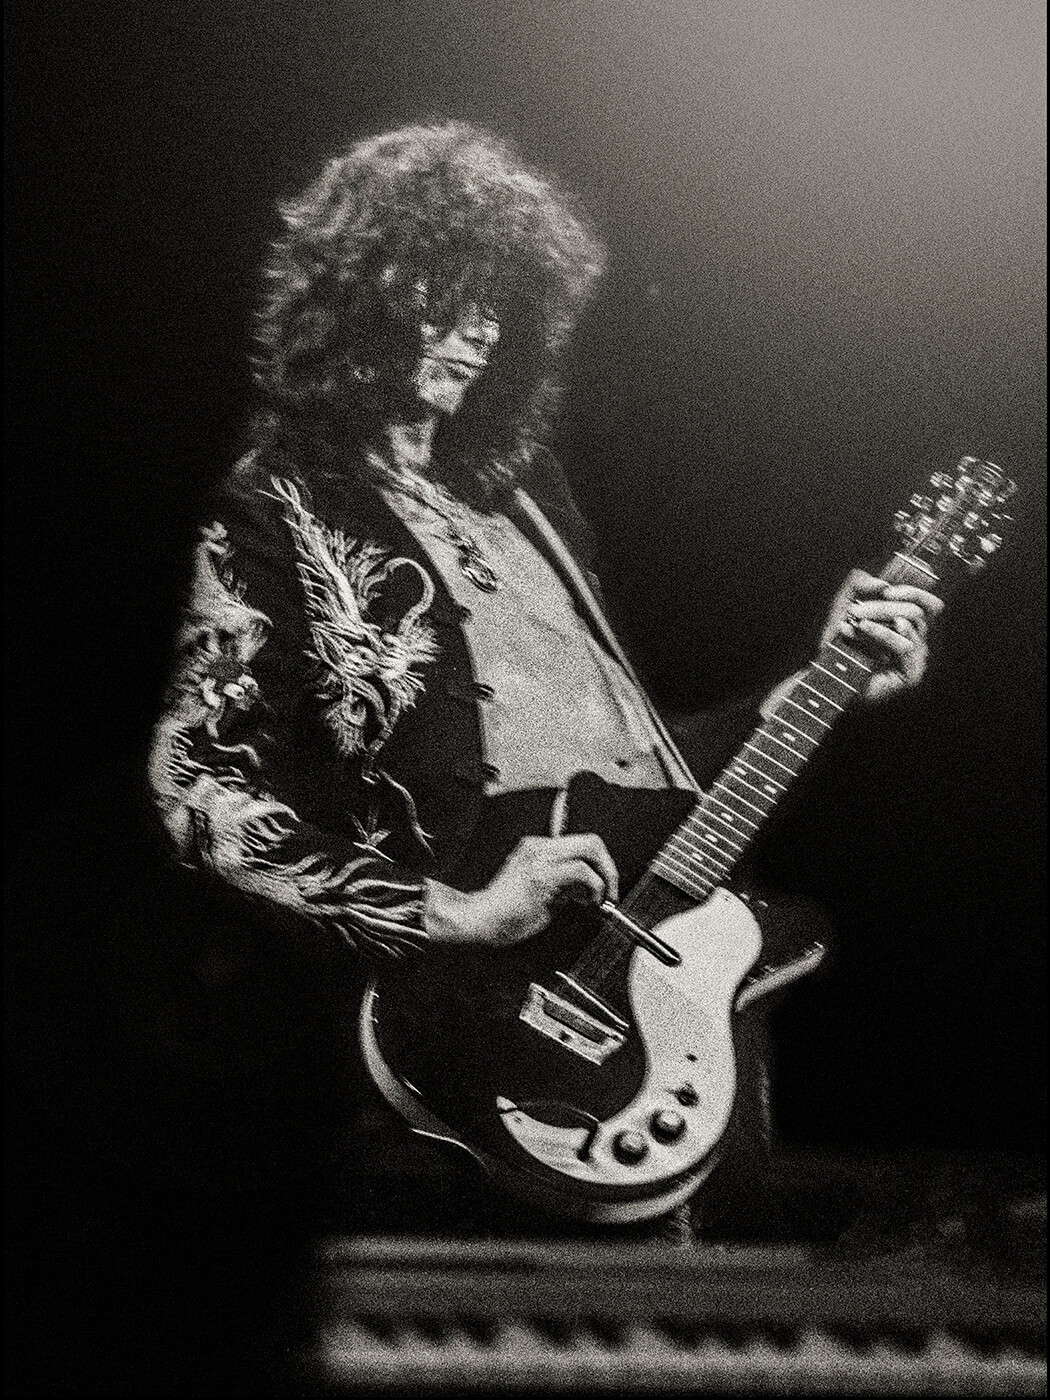 Jimmy Page playing a Danelectro DC-59 onstage in 1975